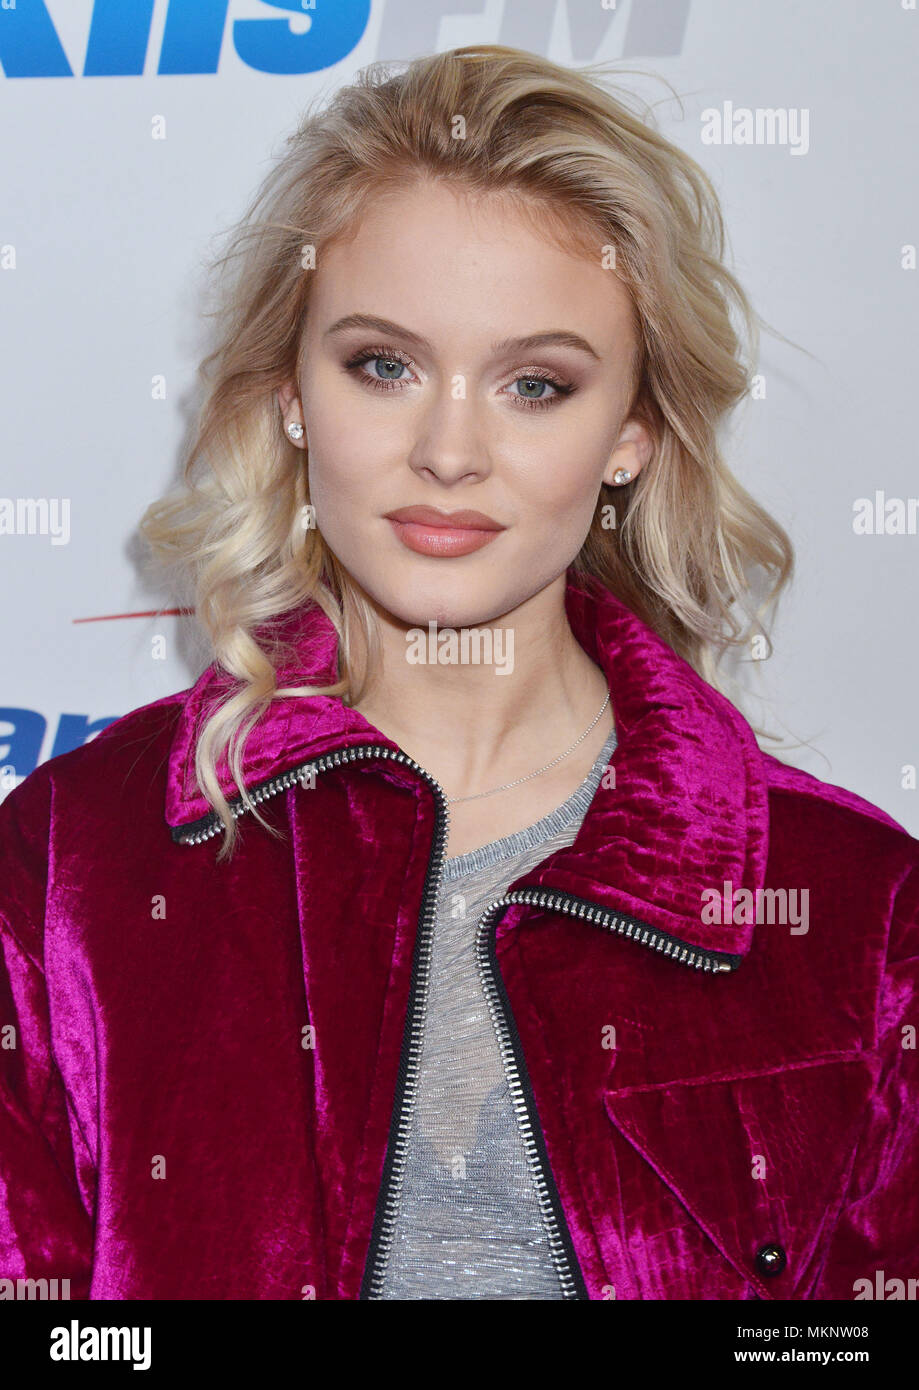 2016 Zara Larsson High Resolution Stock Photography and Images - Alamy